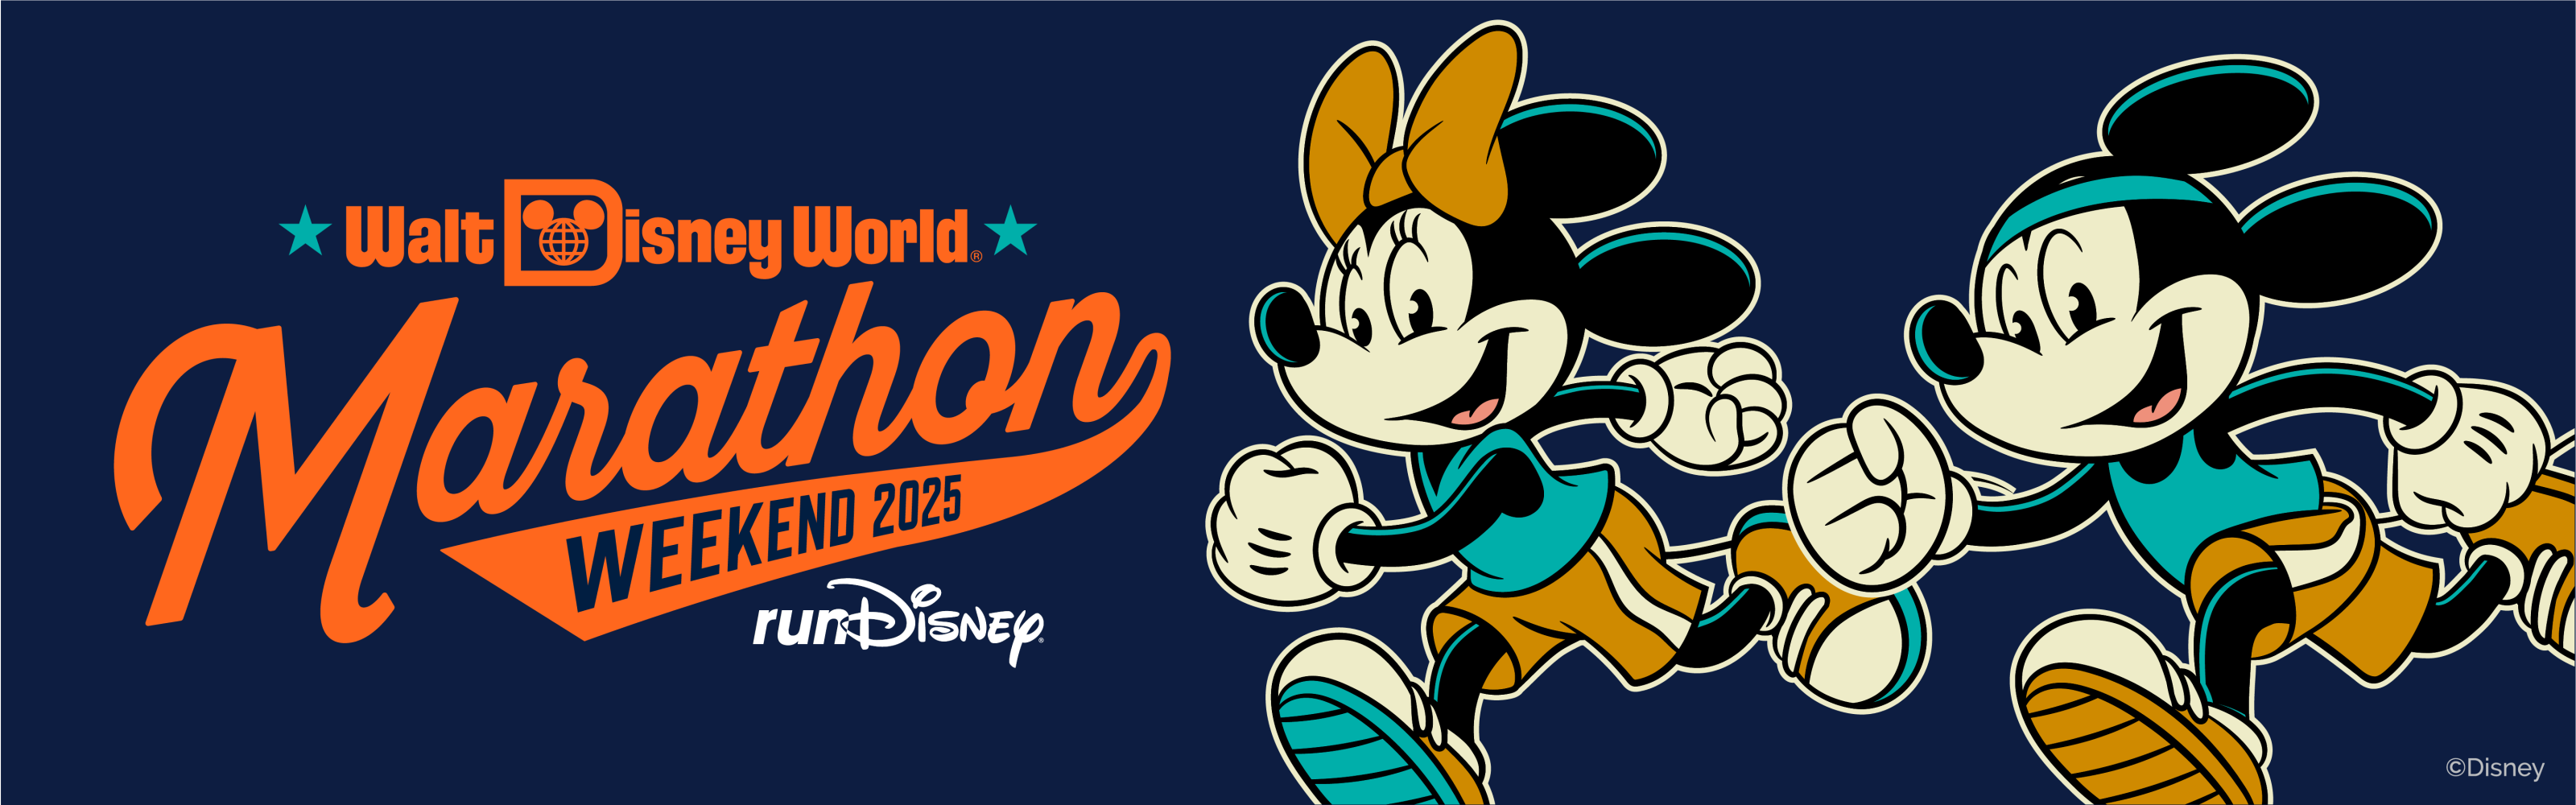 Artwork for the Walt Disney World Marathon Weekend featuring characters such as Mickey Mouse